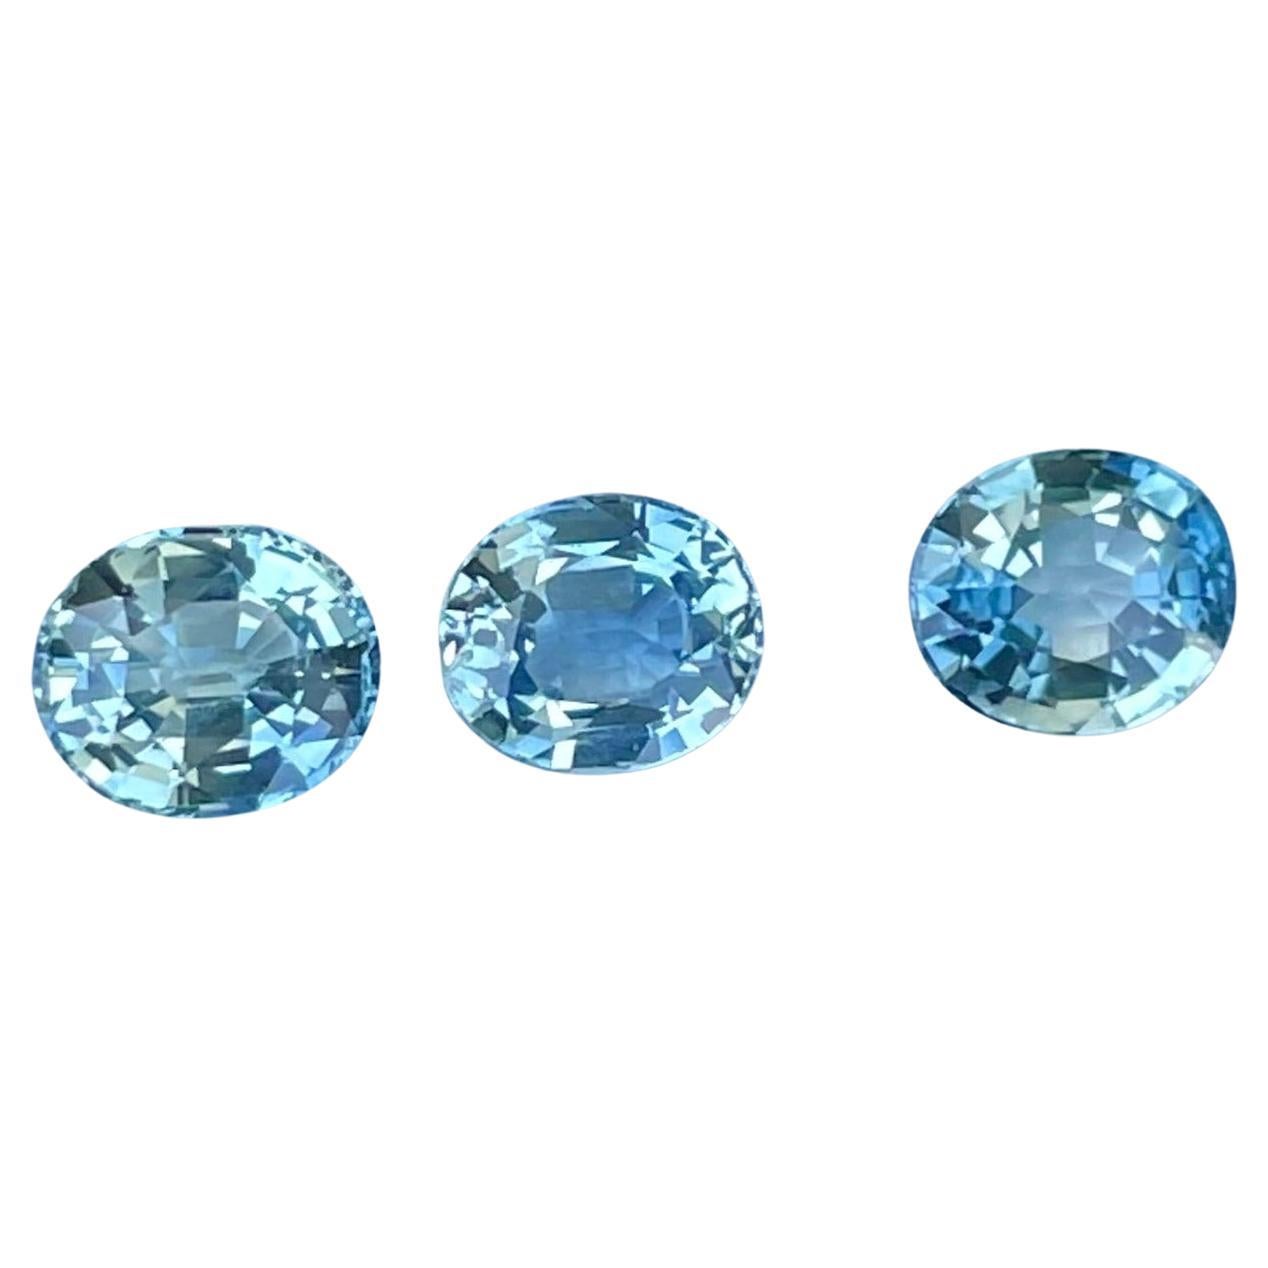 3.55 carats Blue Oval Cut Loose Sapphire Natural Gemstones Set from Sri Lanka For Sale